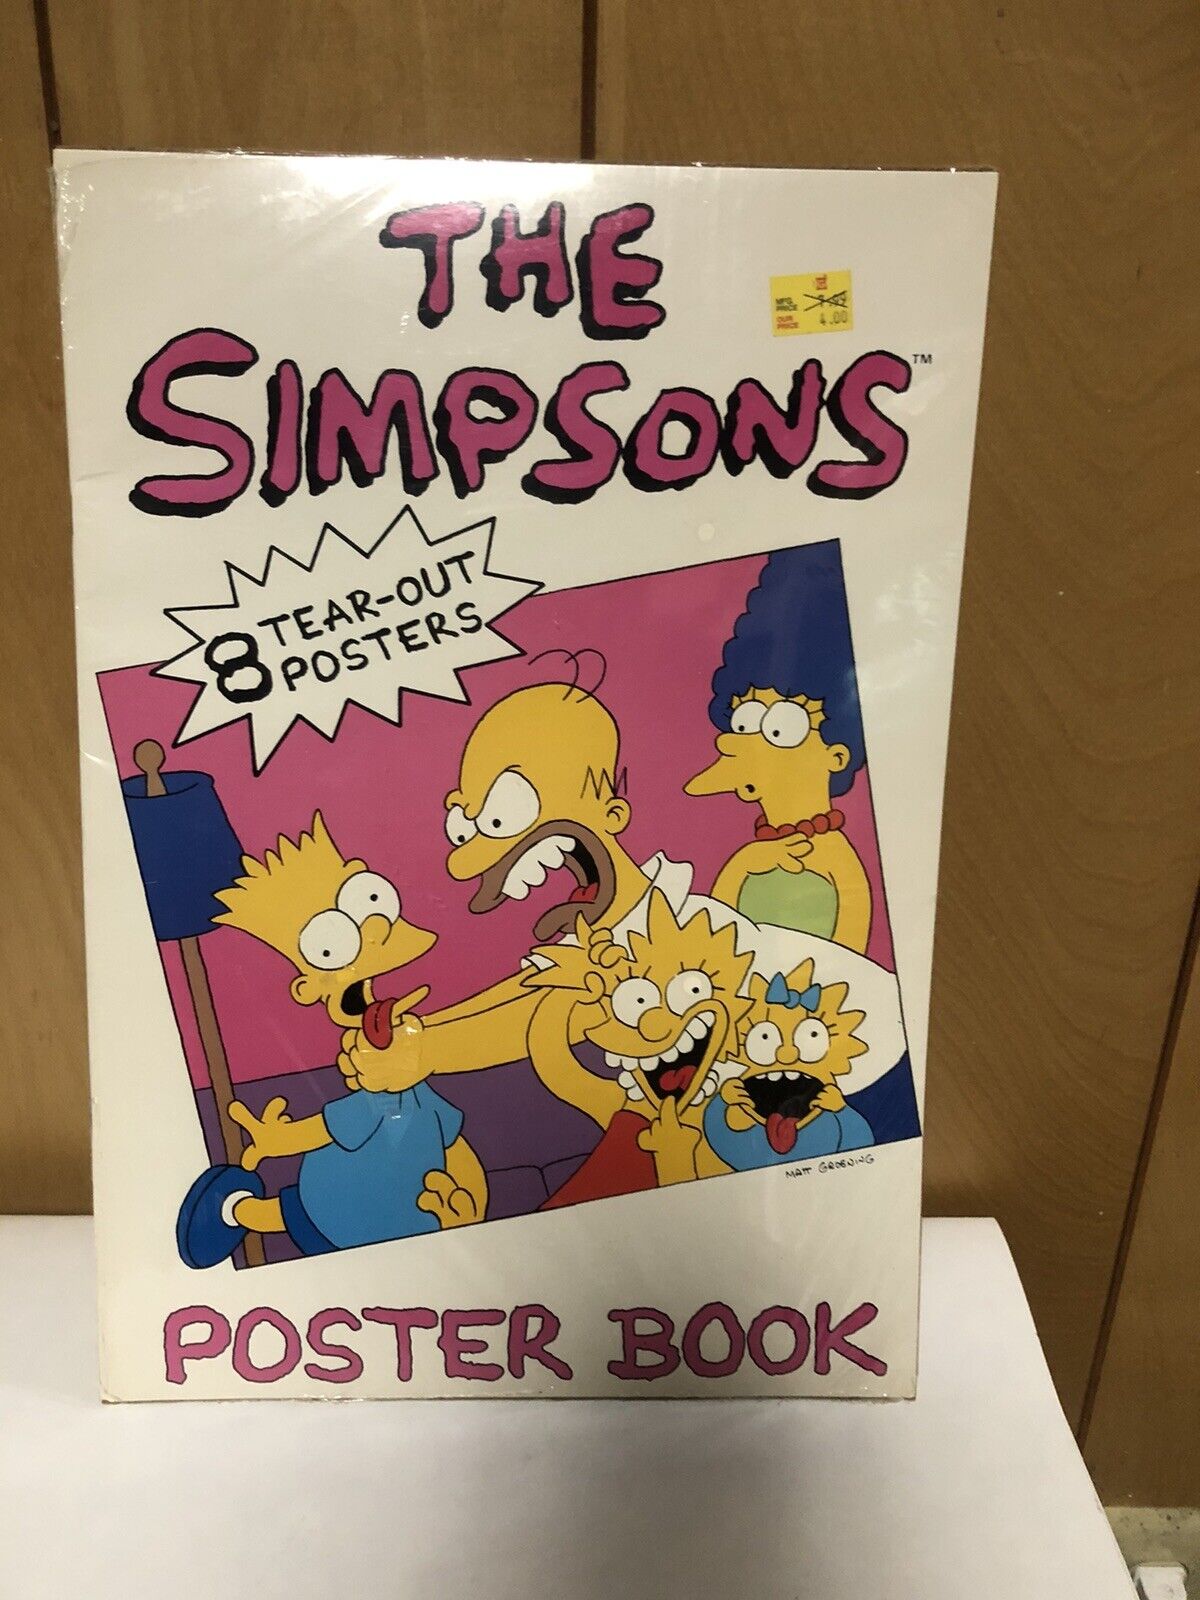 The Simpsons Poster Book 8 tear out posters  sealed 1990 Natychmiastowa dostawa super mile widziane